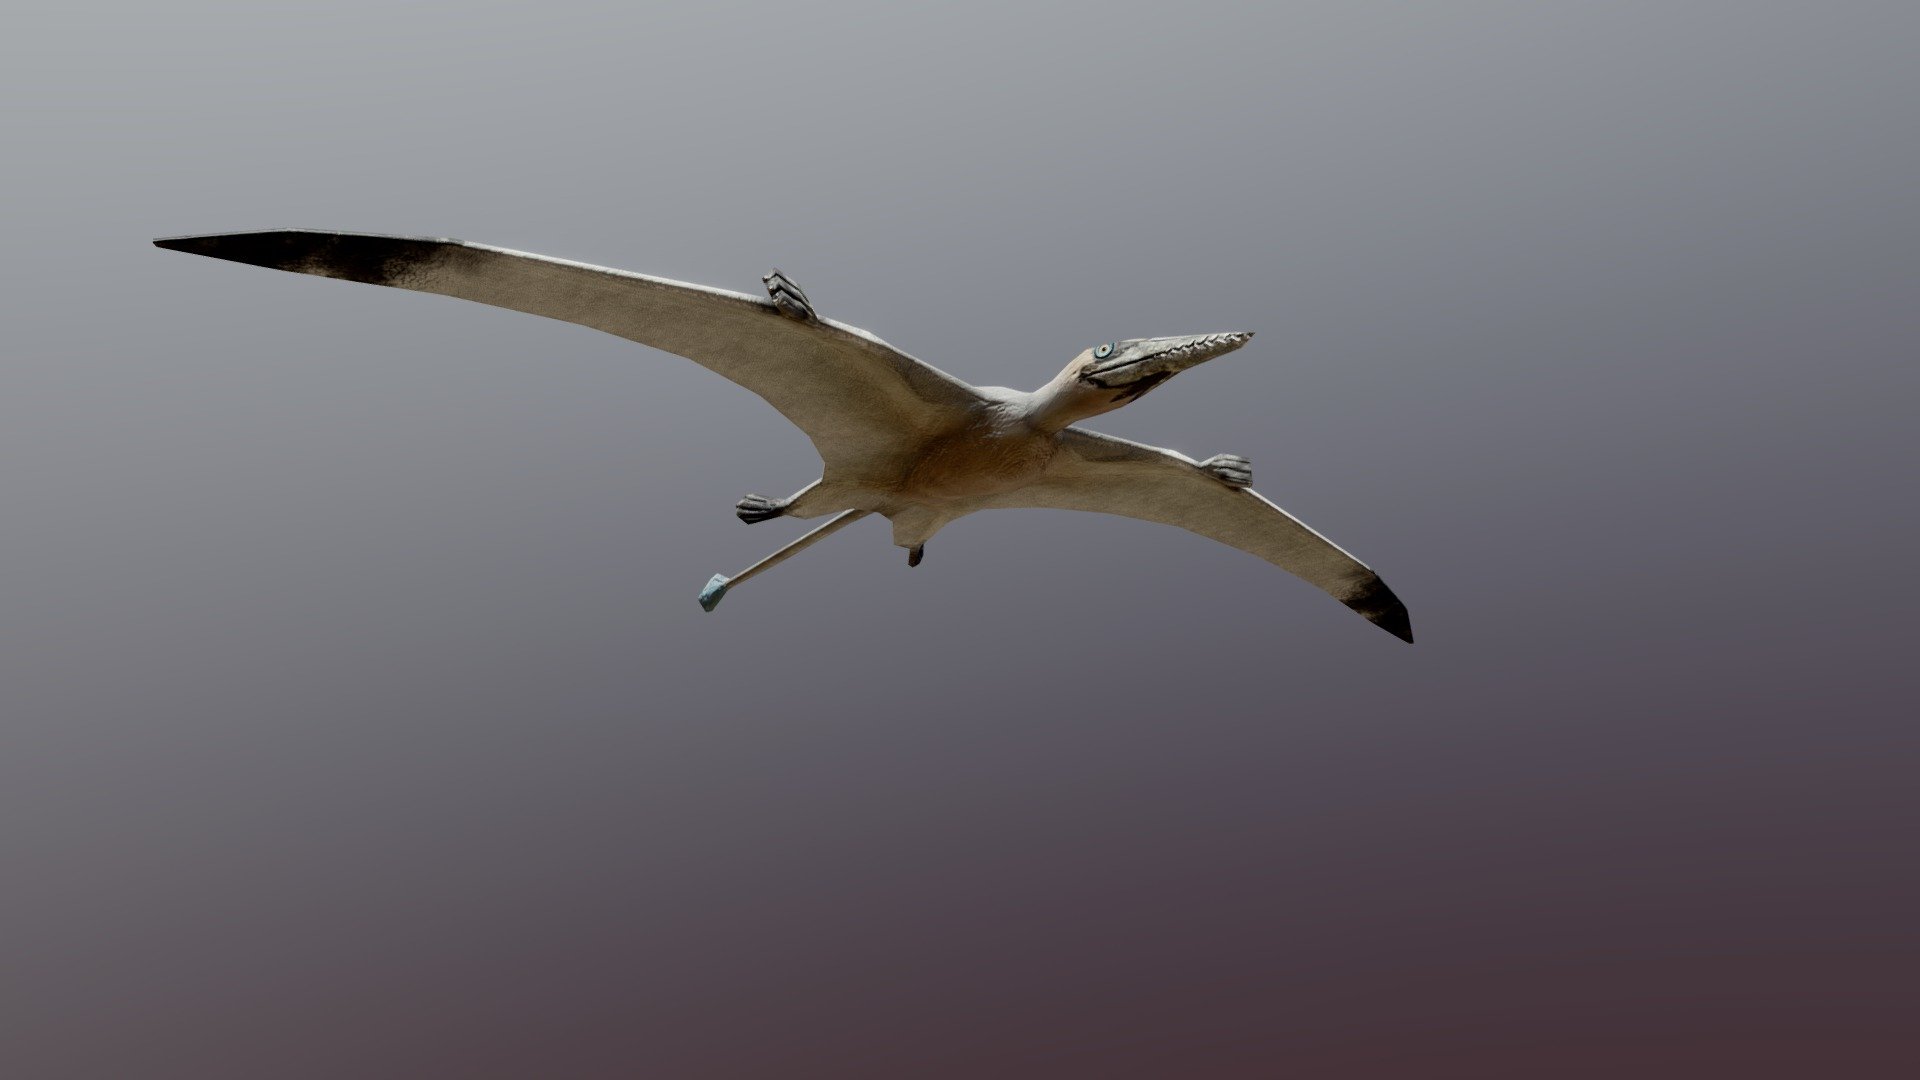 Gliding animation for a nice lightweight rhamphorhyncus model, a Jurassic pterosaur that ate fish, squid, etc. Gave it a gannet-inspired colorscheme in Substance Painter.

The gliding animation is the only one that comes with this model. The skeleton is very basic, and may require new skinning or rigging to try to do any more ambitious movements- I modeled it in flight, I don't know if the geometry will support it landing and walking without some bad clipping. But, if you just want some gliding pterosaurs in the background, this could be perfect for you 3d model